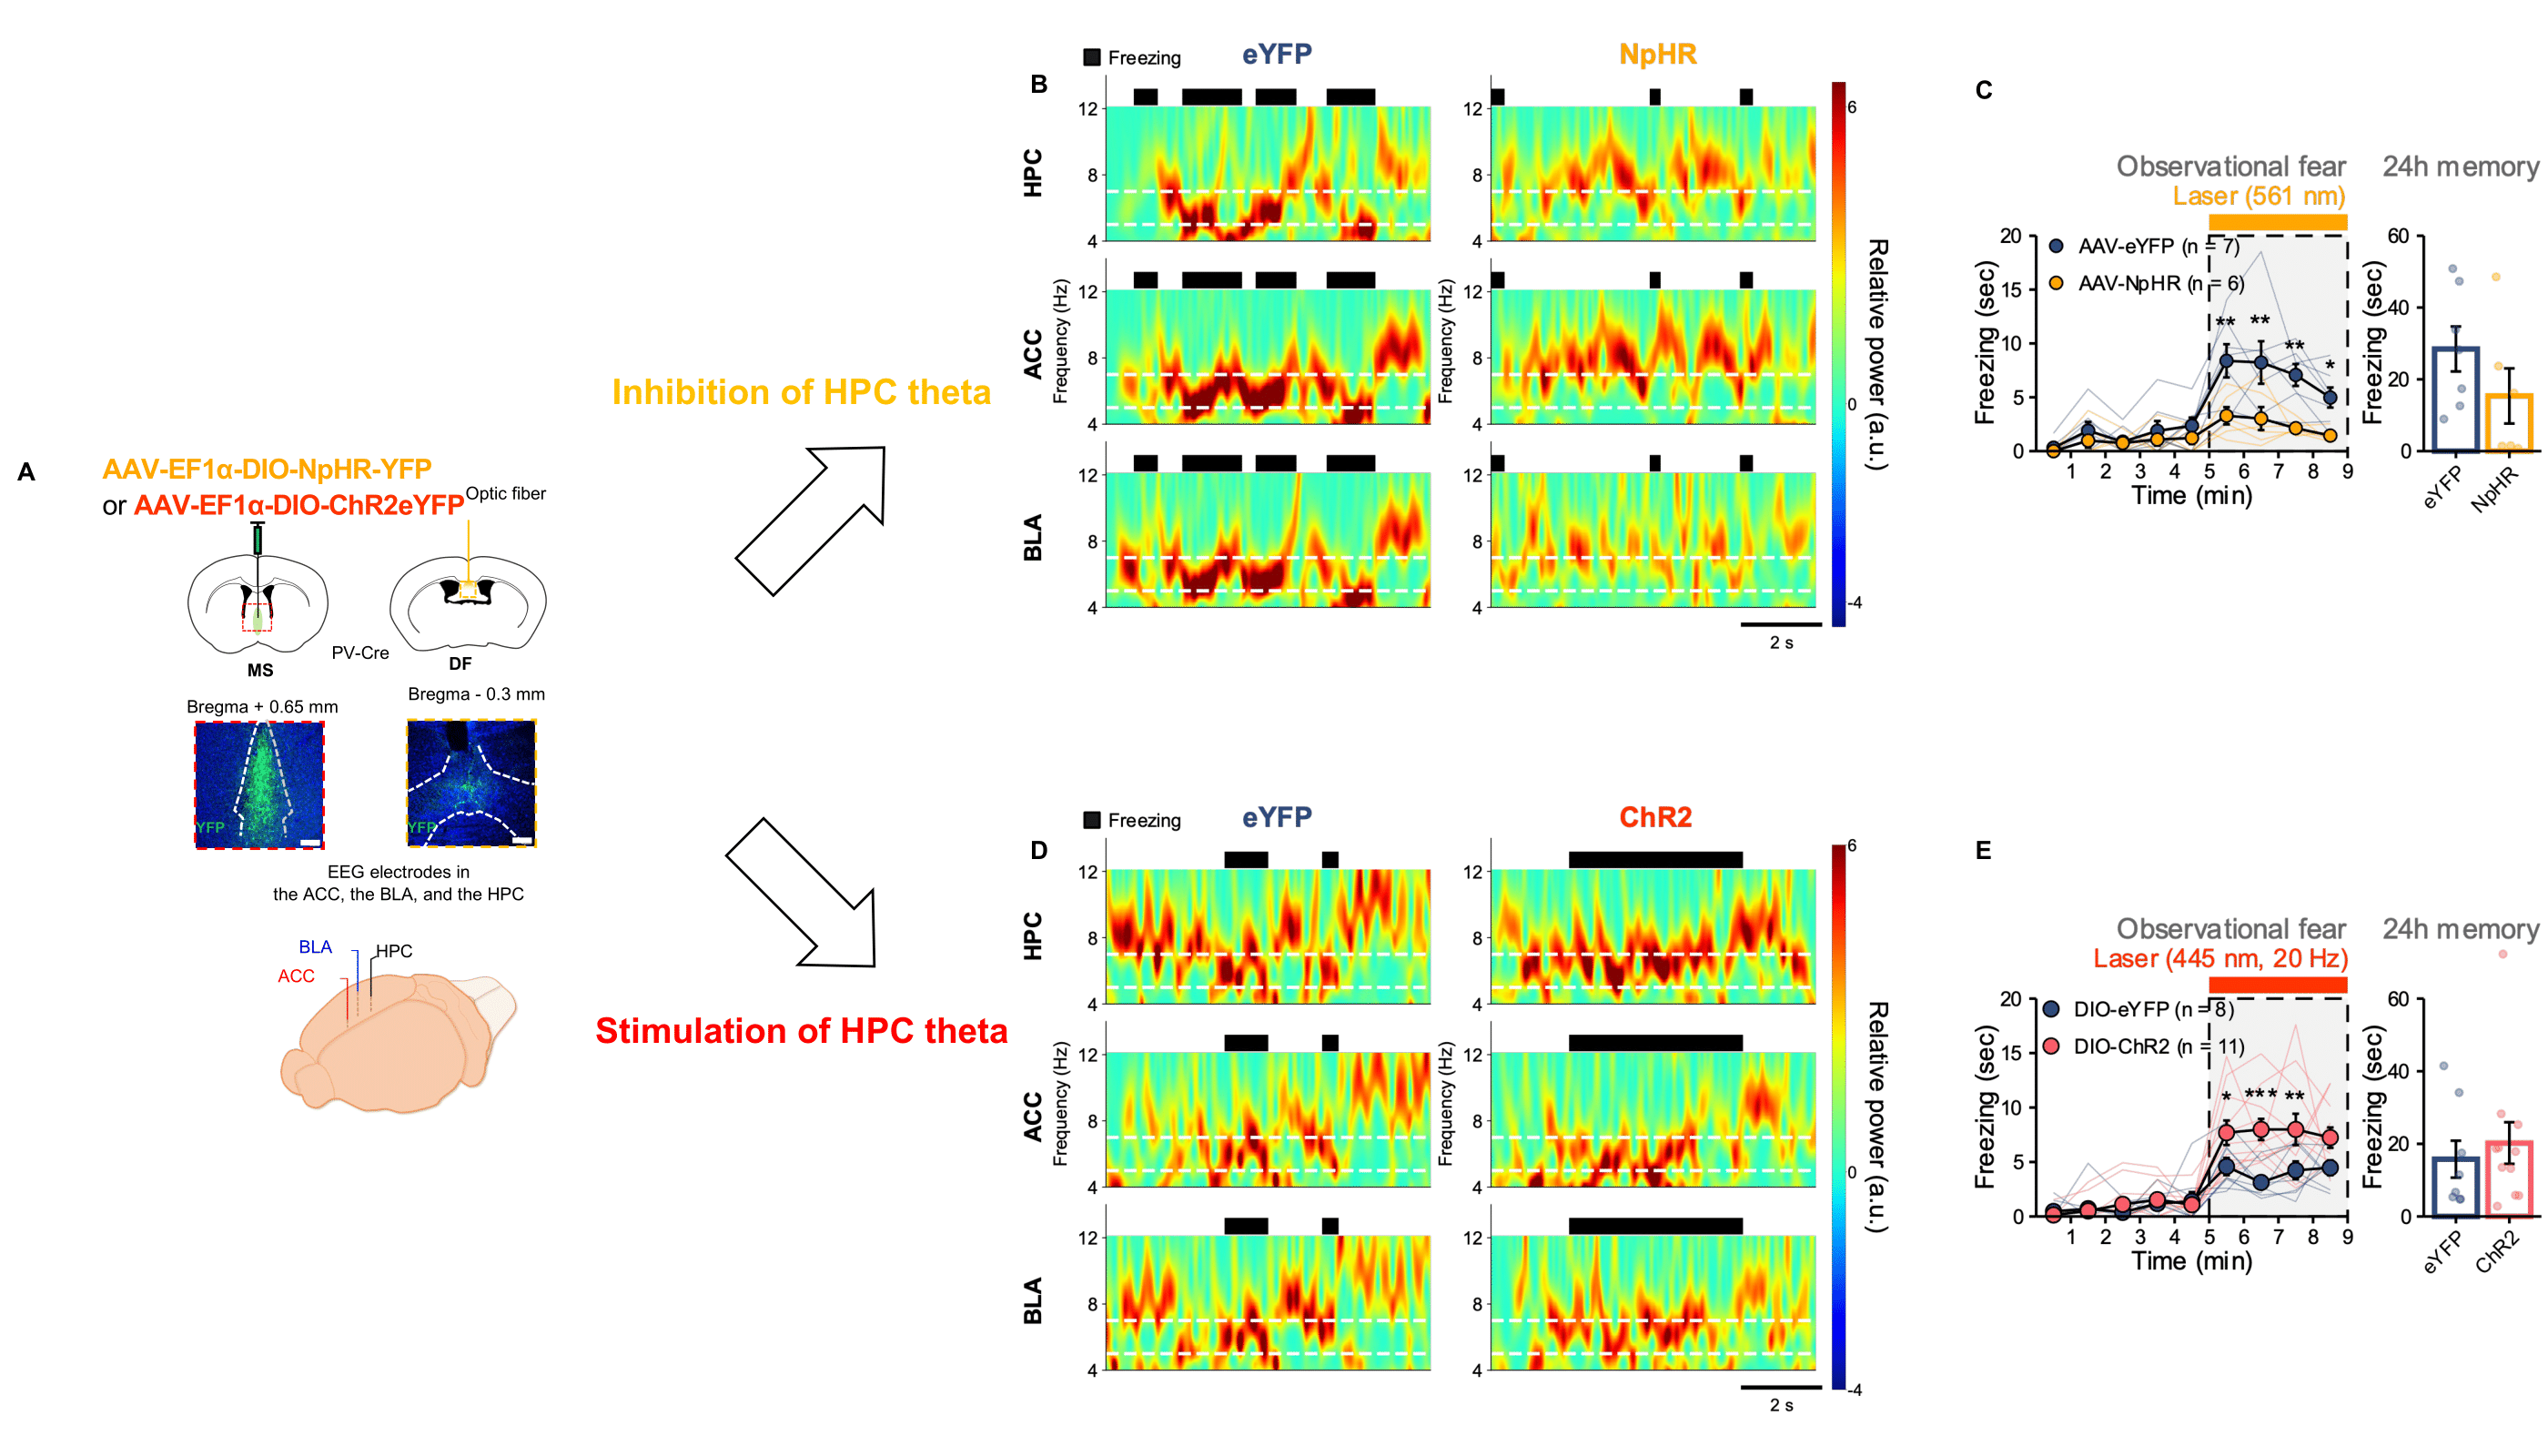 Figure 3. Hippocampal theta oscillations bi-directionally modulate ACC-BLA theta oscillations and observational fear.
            A.Schematic illustrations of hippocampal modulations.
            B & C. Optogenetic inhibition of hippocampal theta decreased 5-7 Hz in the ACC-BLA circuit and observational freezing.
            D & E. Optogenetic stimulation of hippocampal theta increased 5-7 Hz in the ACC-BLA circuit and observational freezing.
            